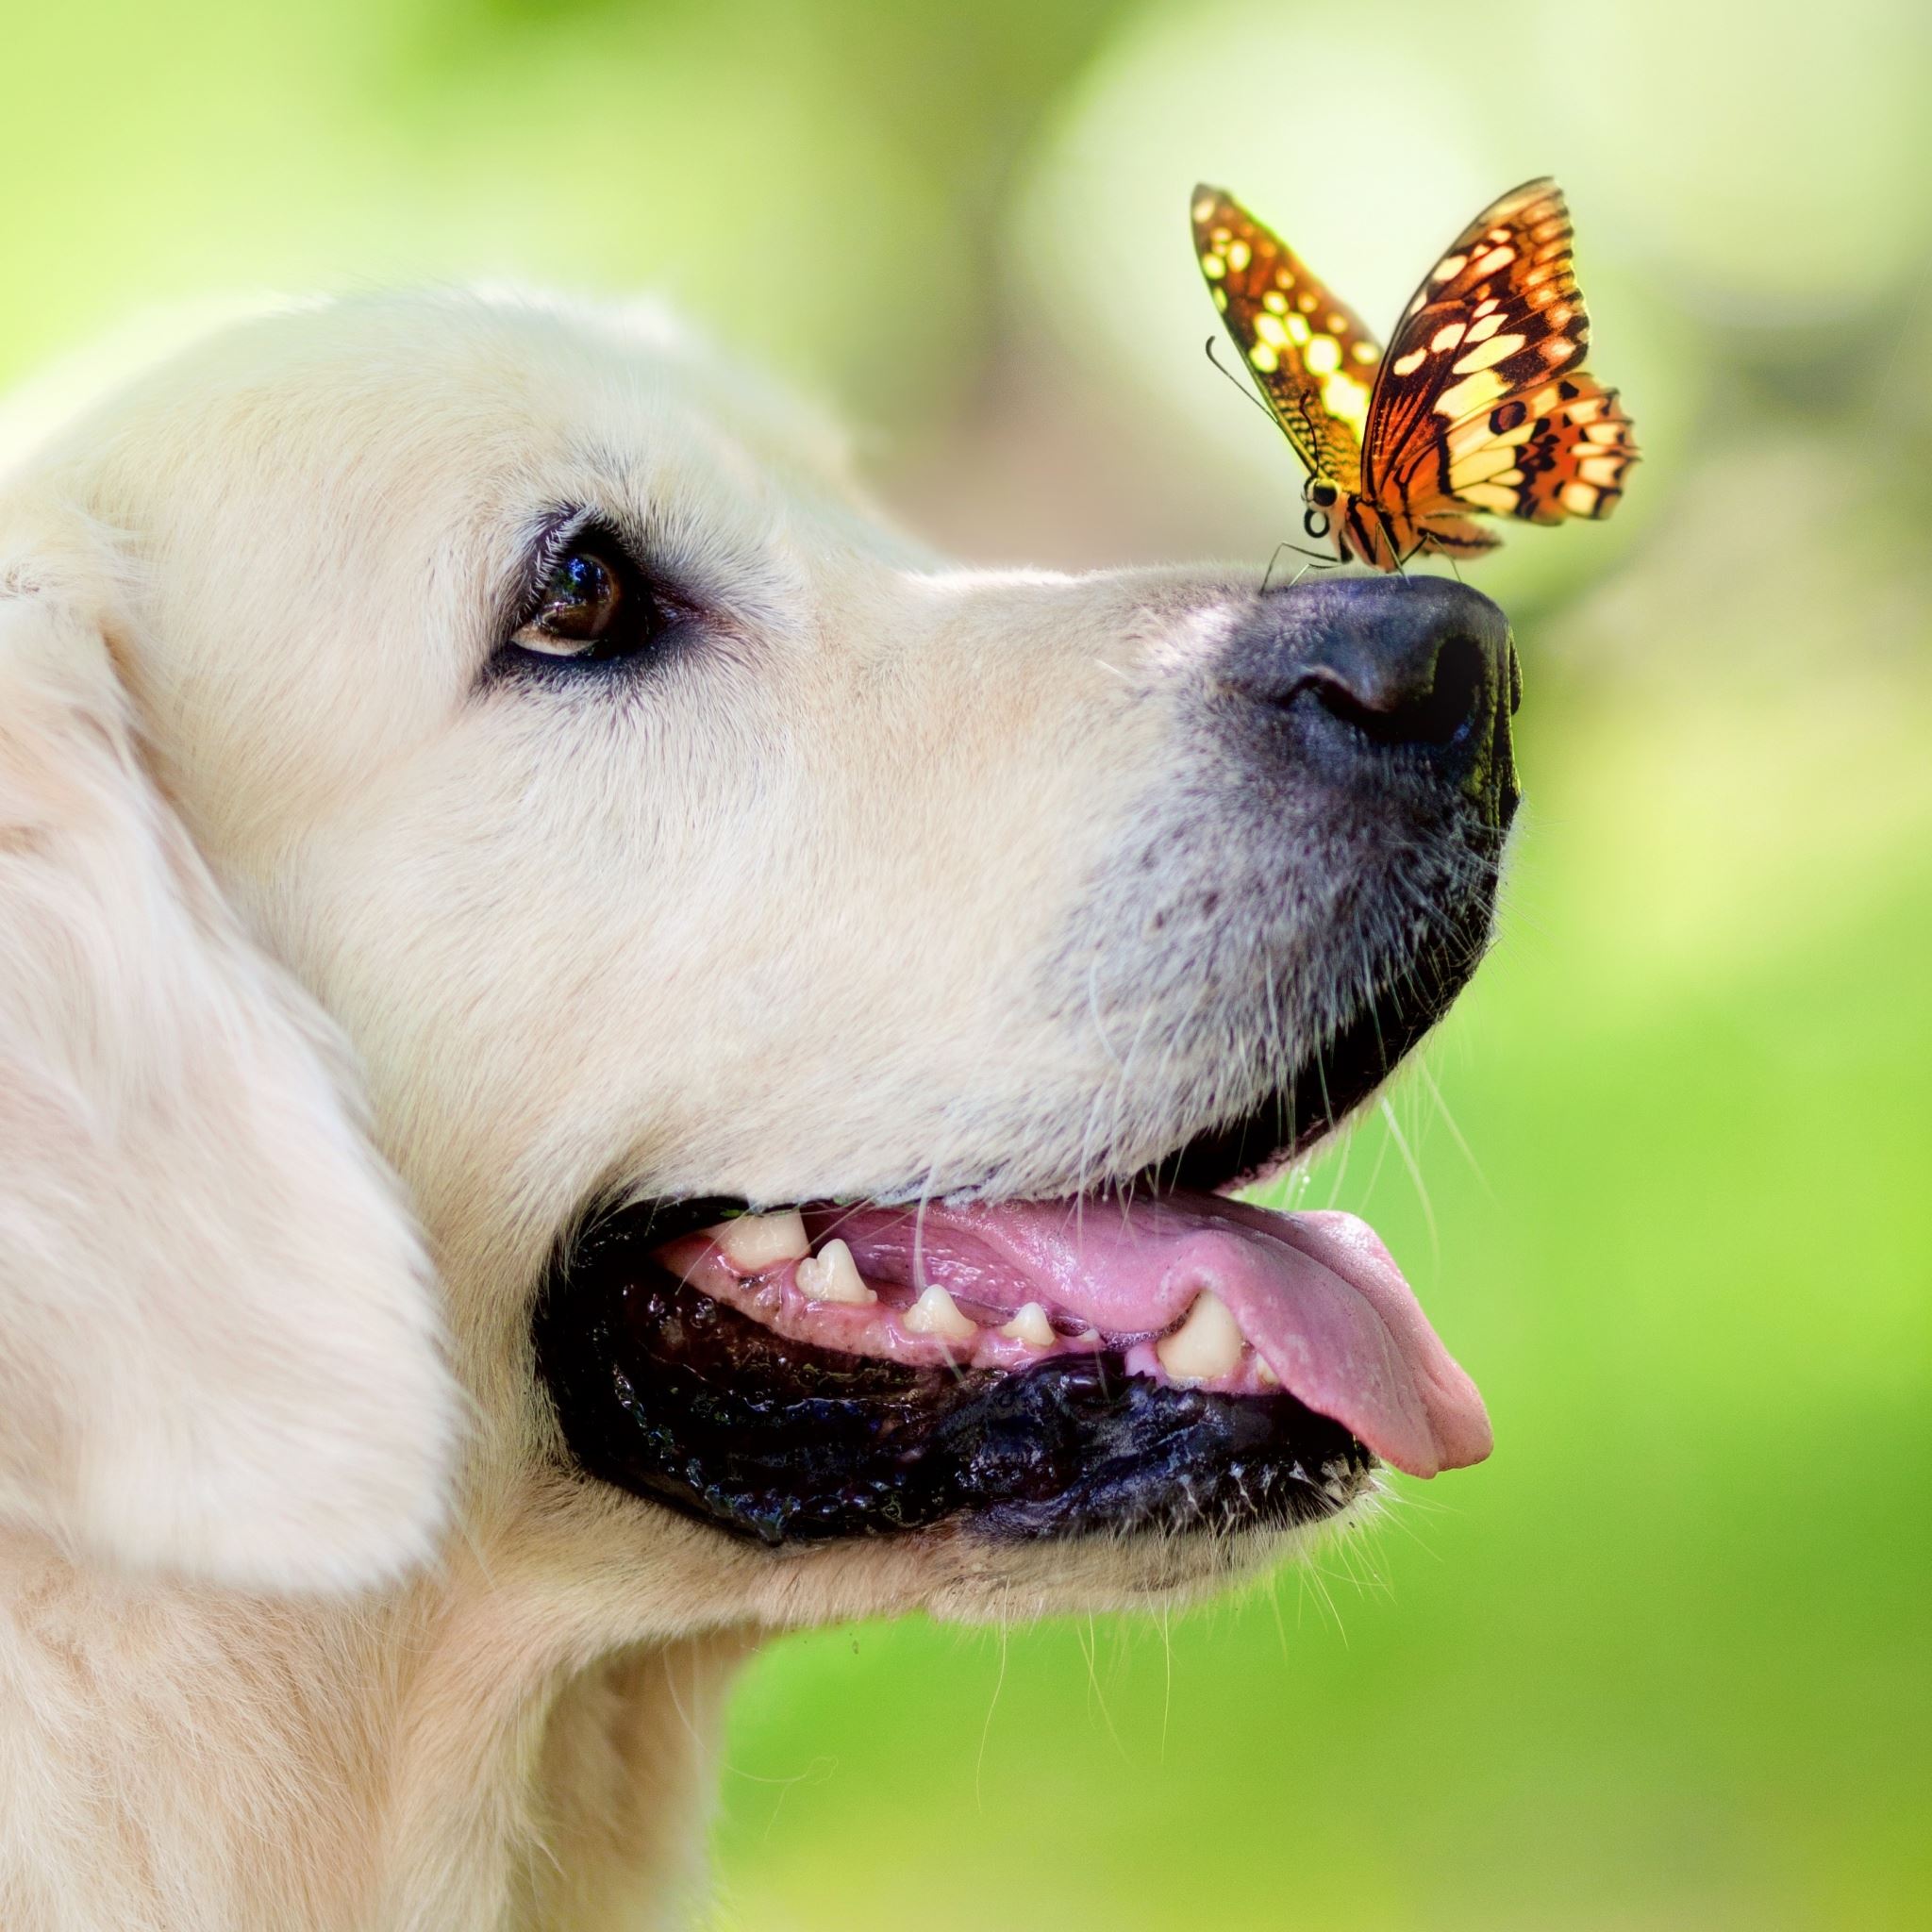 Dog butterfly iPad Air Wallpaper Free Download